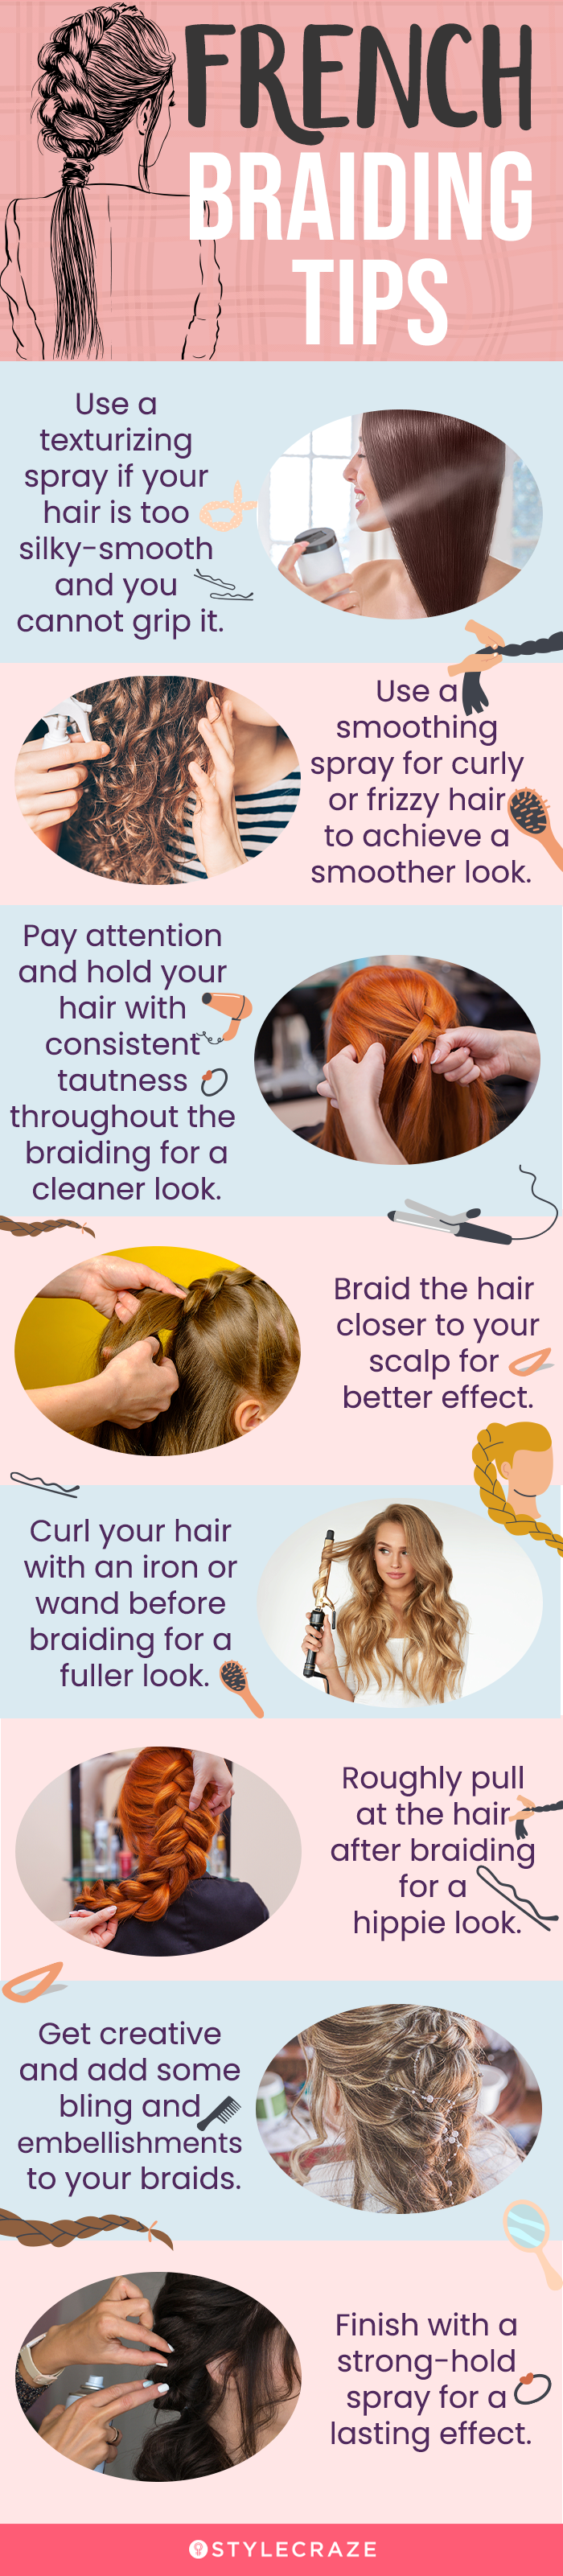 french braiding tips [infographic]